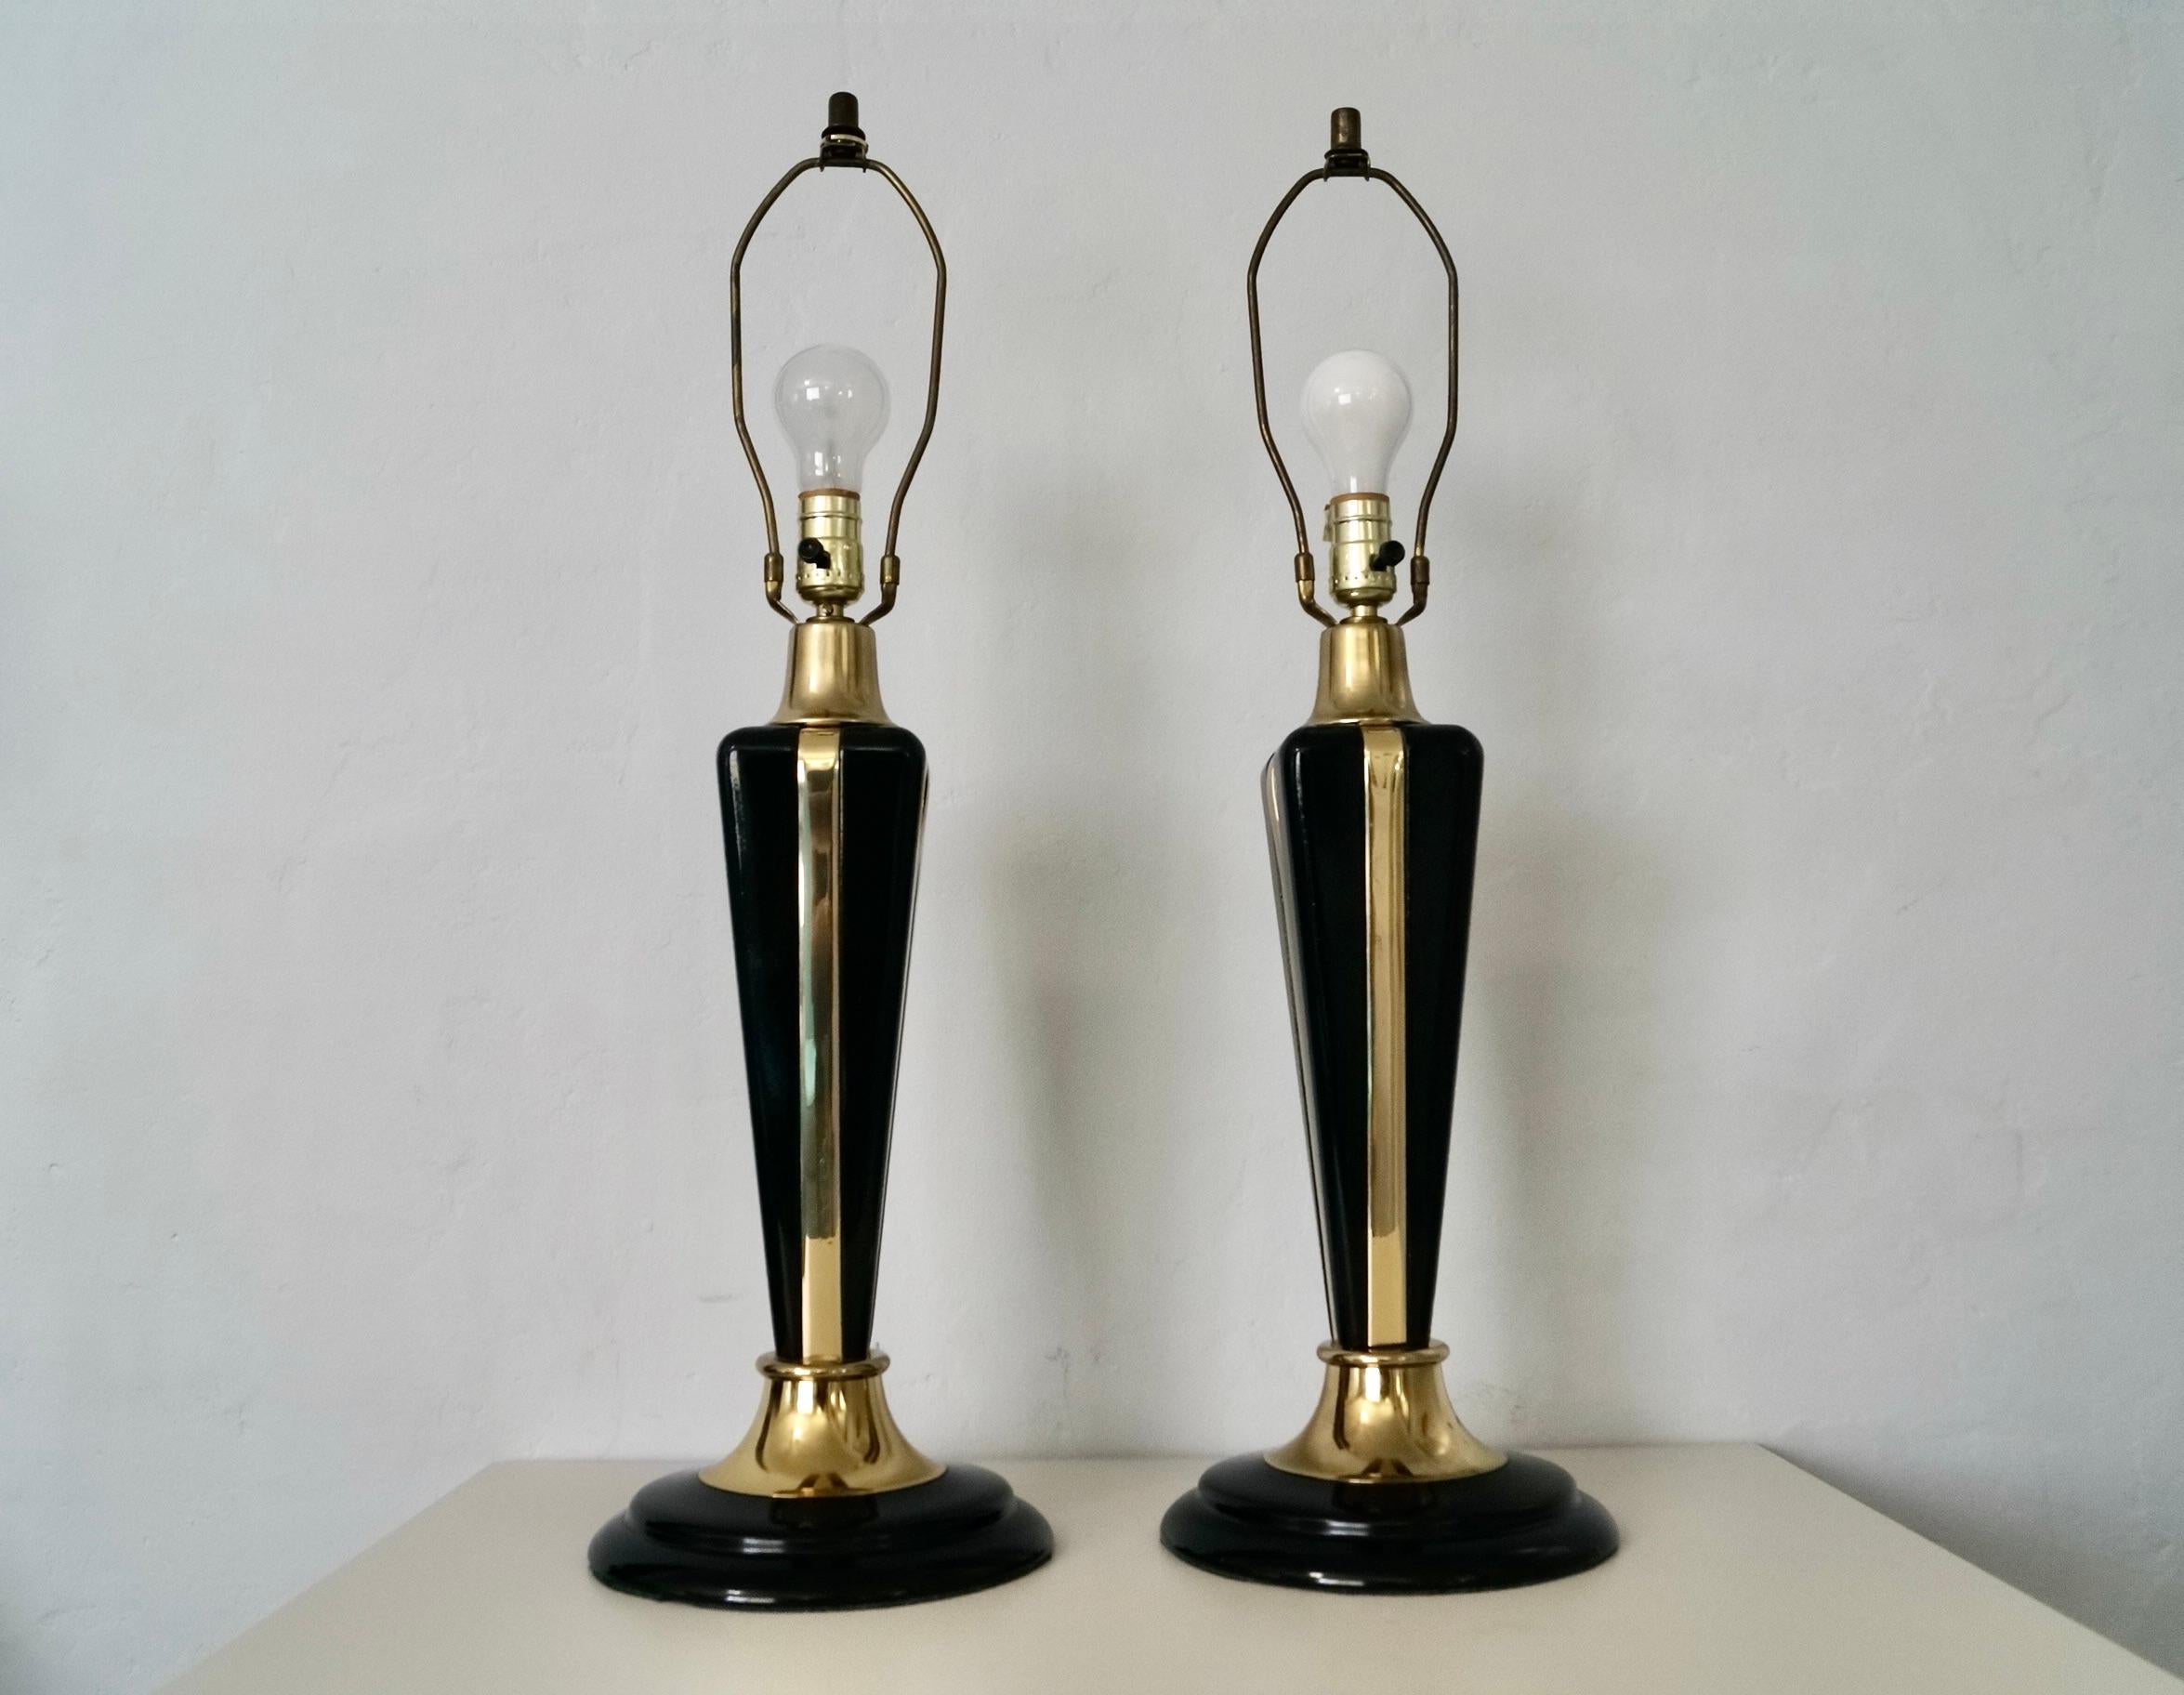 Vintage pair of 1980’s Art Deco table lamps for sale. They were manufactured in 1987, and made here in the US by Bella Lighting. They both still maintain the original maker’s mark sticker along with the date manufactured. They have a black metal